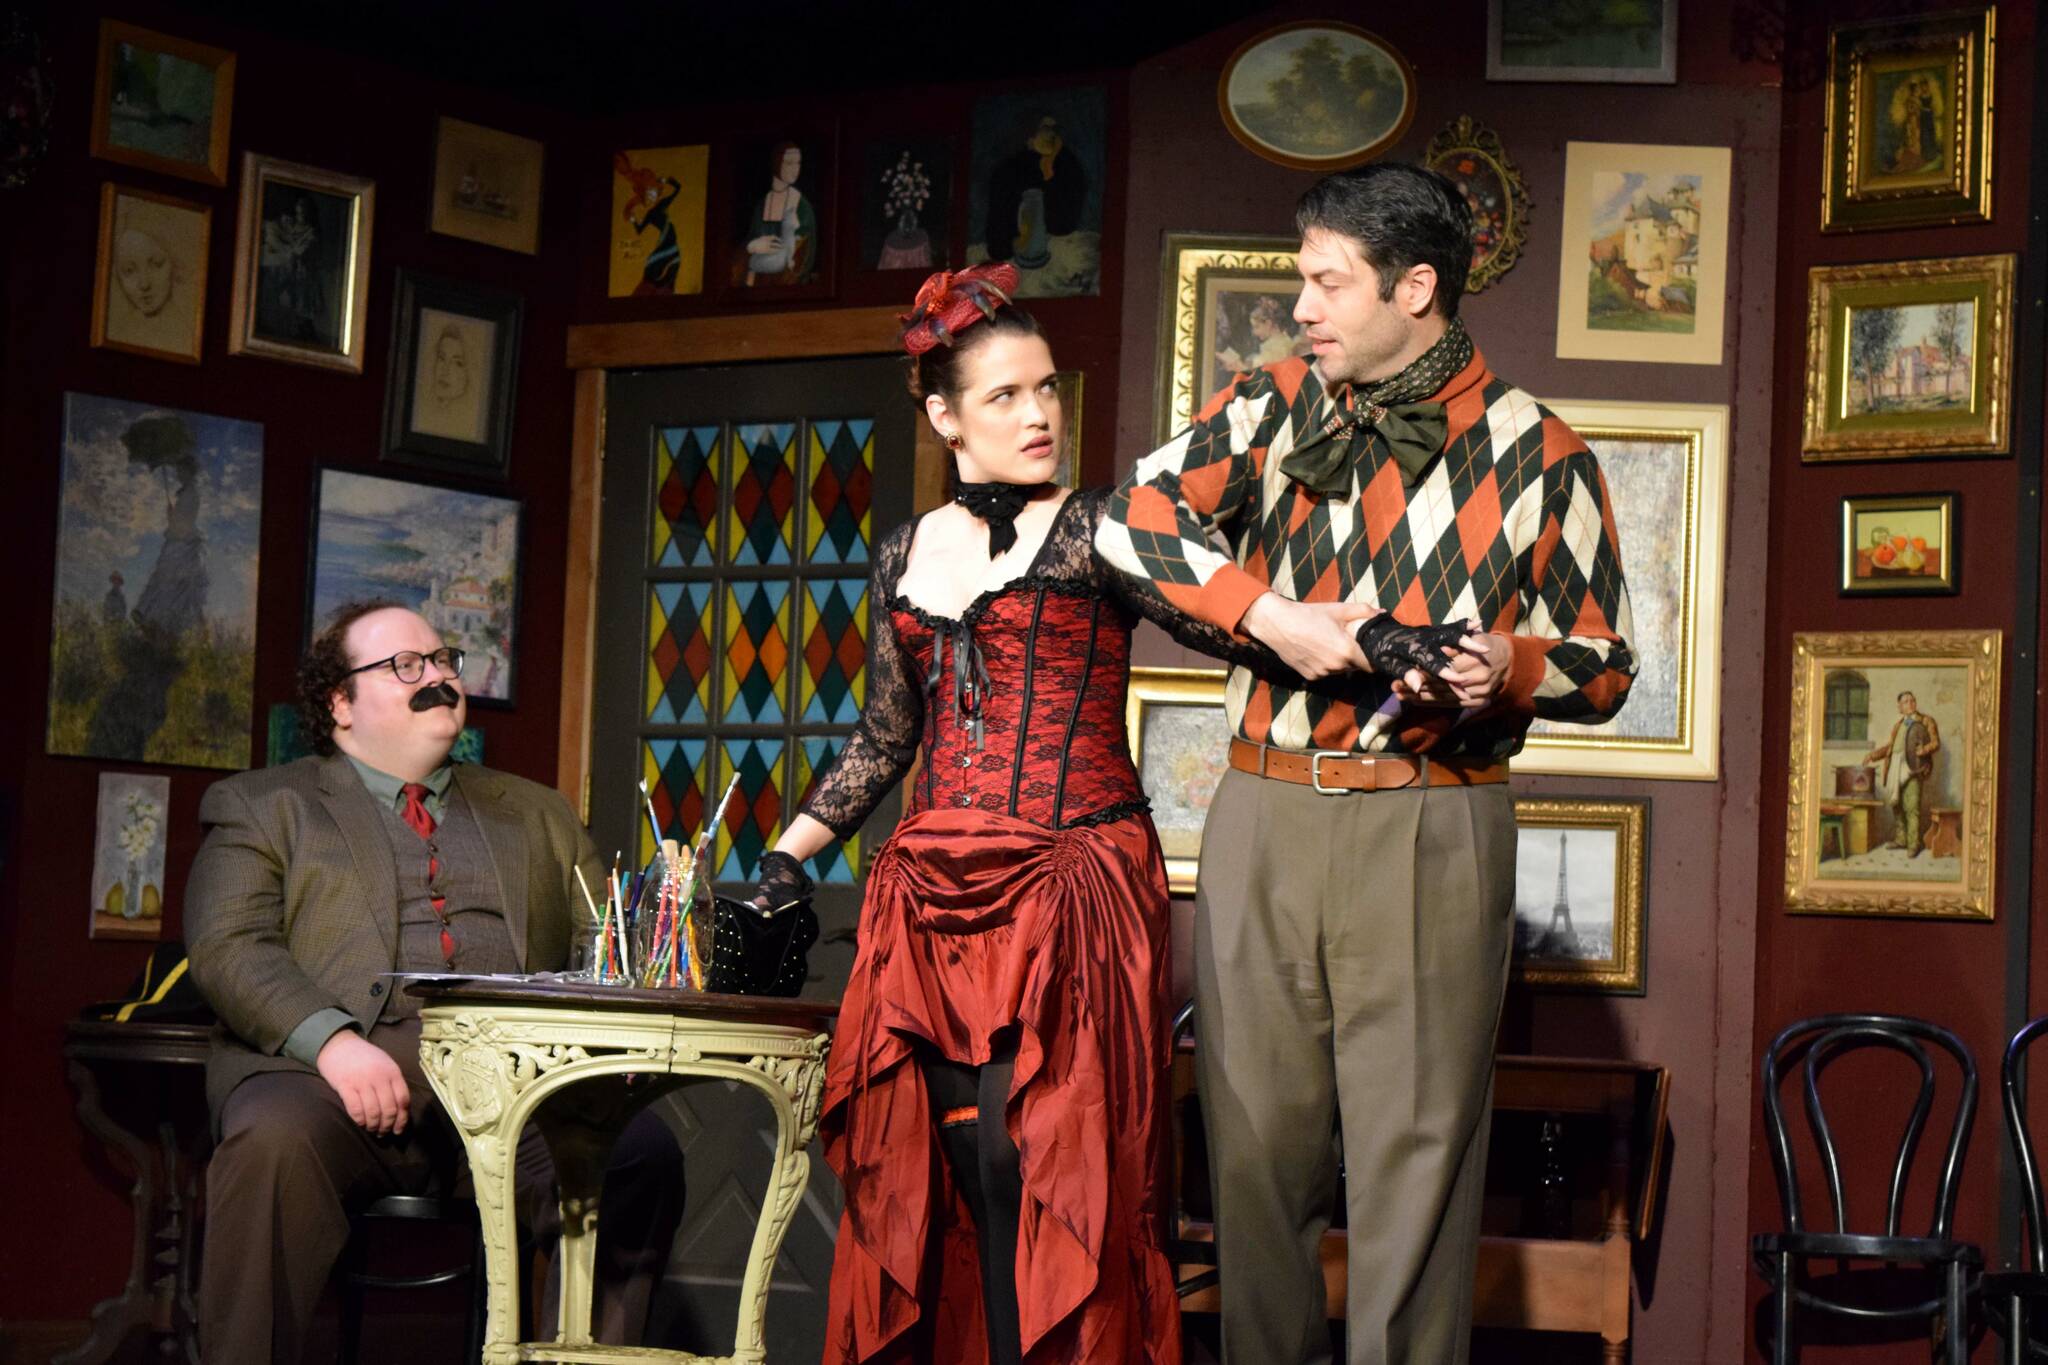 Photos Conor Wilson/Valley Record.
Valley Center Stage actors rehearse “Picasso at the Lapin Agile.” From left: Alex Demana (as Albert Einstein), Veronica Ydalgo (as Suzanne) and Christopher Clark (as Pablo Picasso).